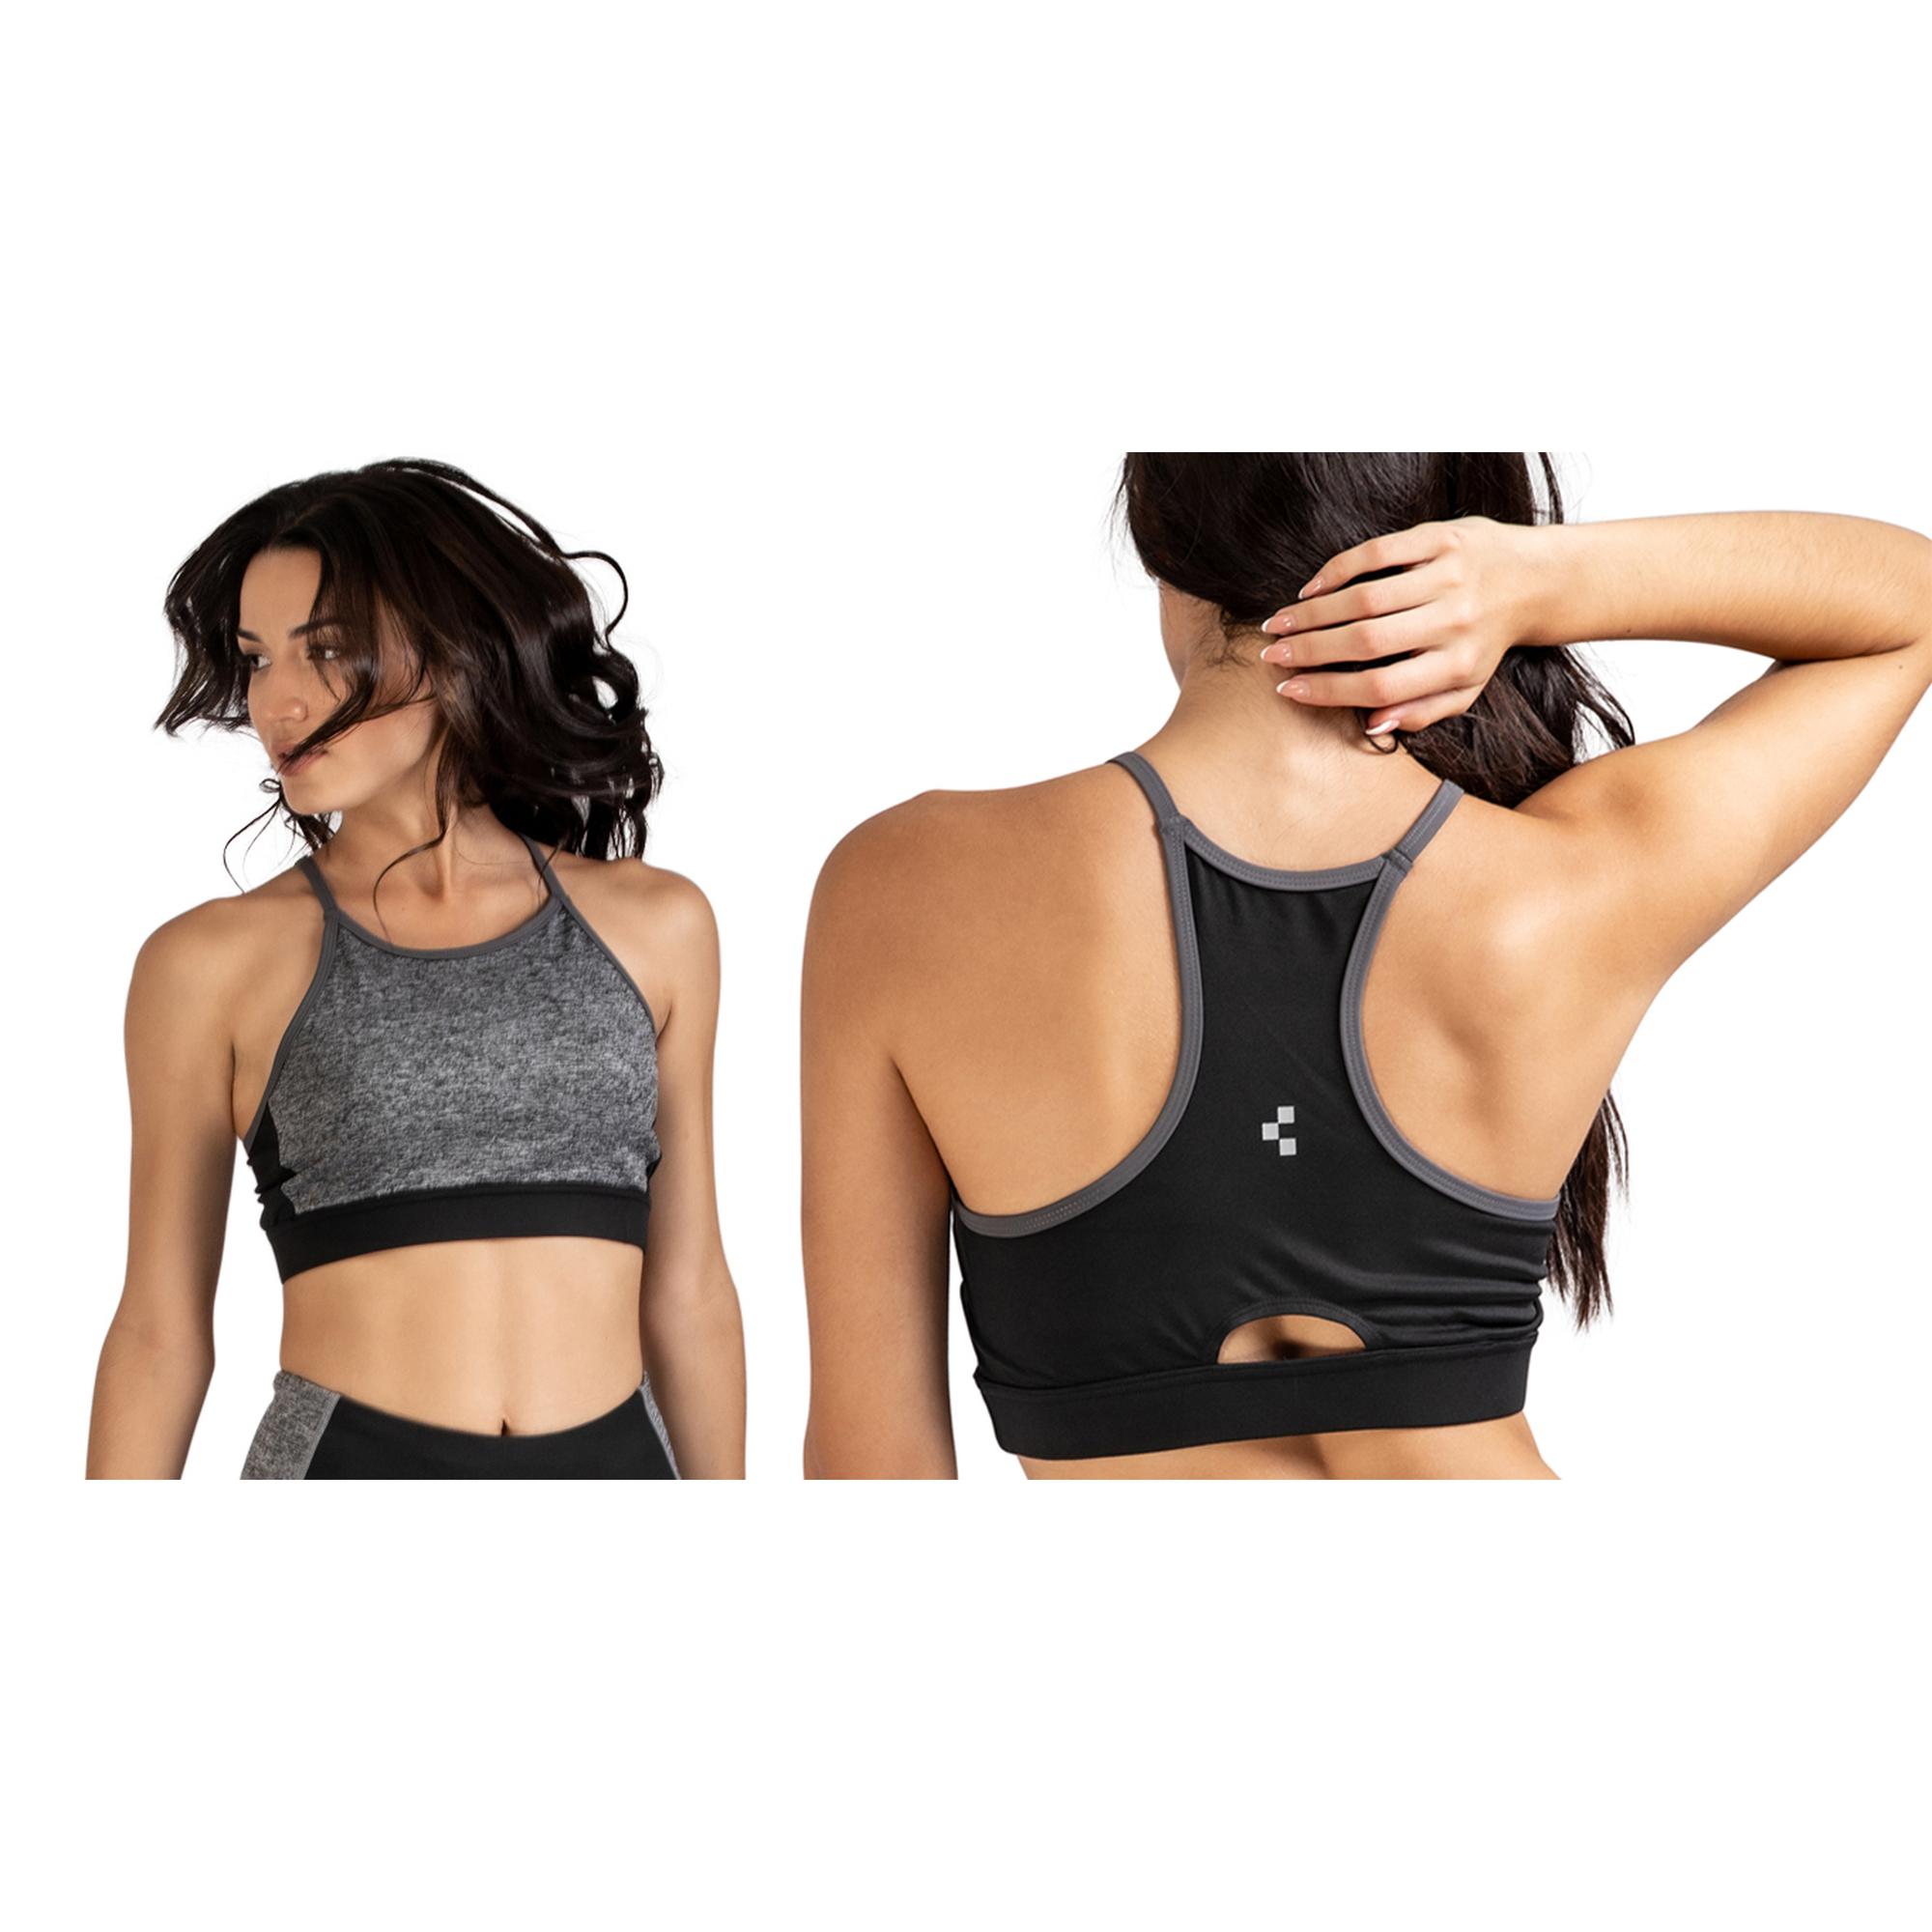 SPORTS BRA WITH REMOVABLE CUP - 302-0400079